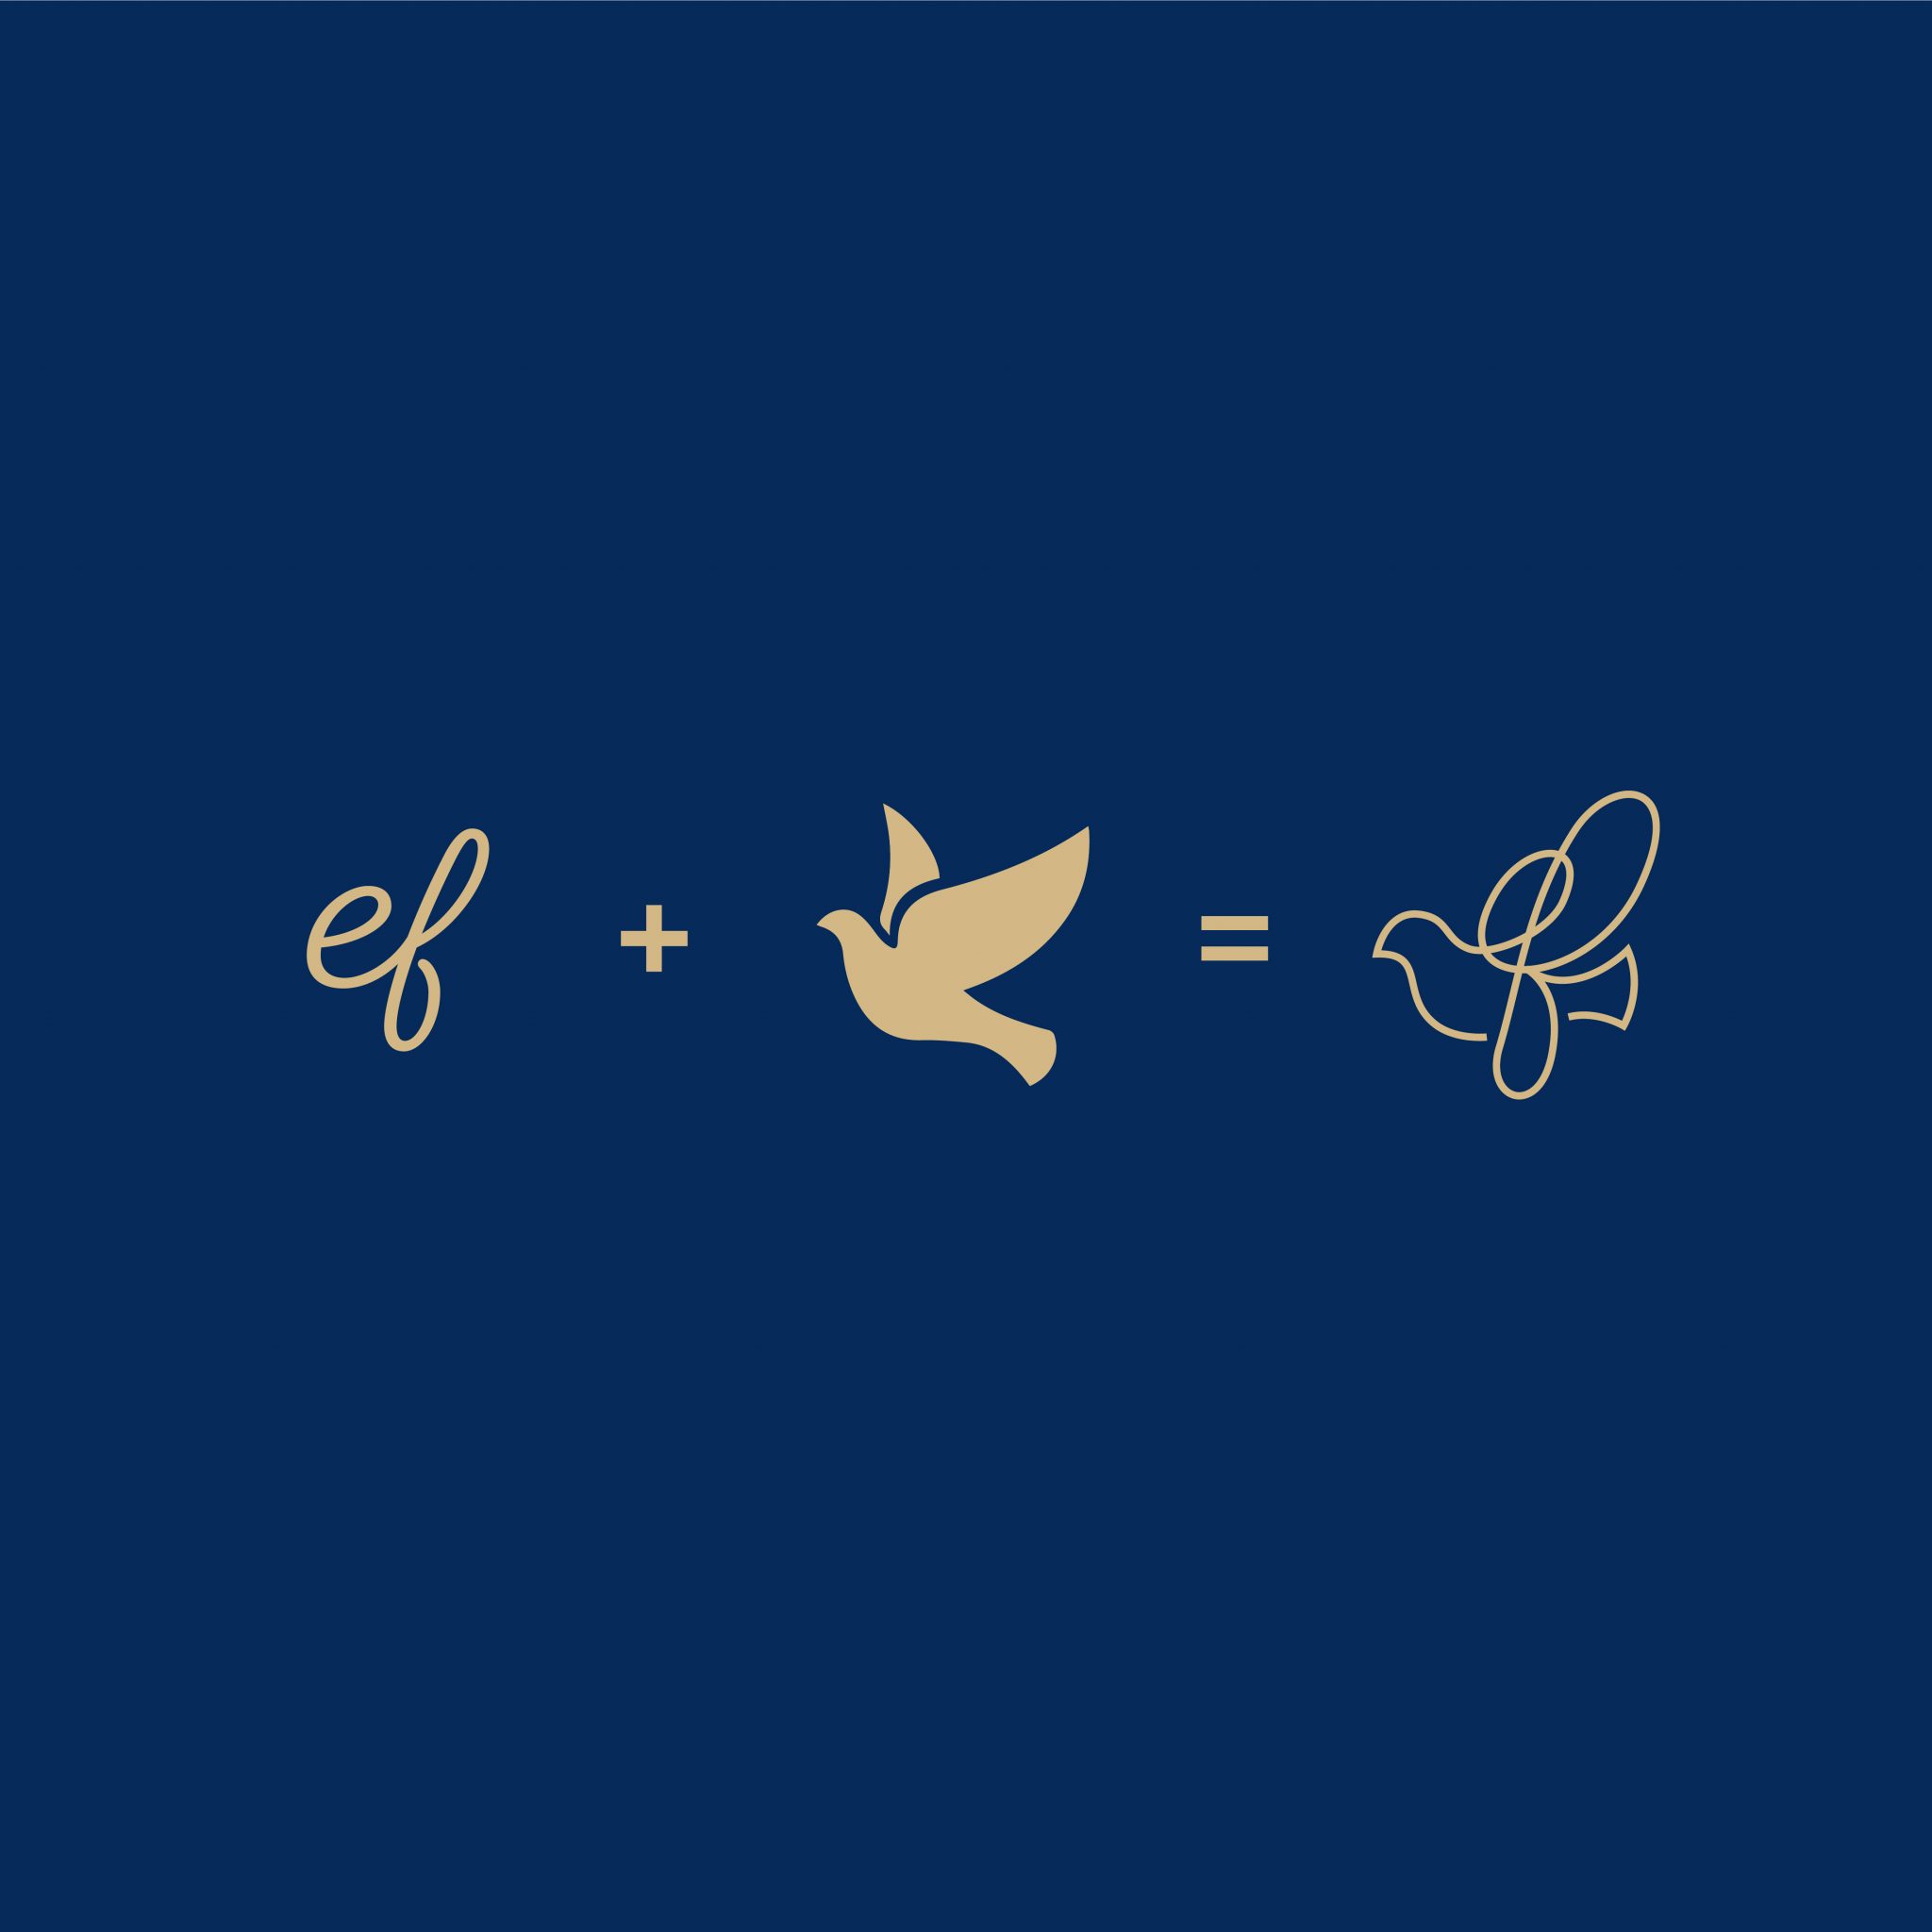 Eisen Family Private Fund logo development showing the letters 'ef' + a flying bird graphic together to make the logo mark - gold on navy blue background